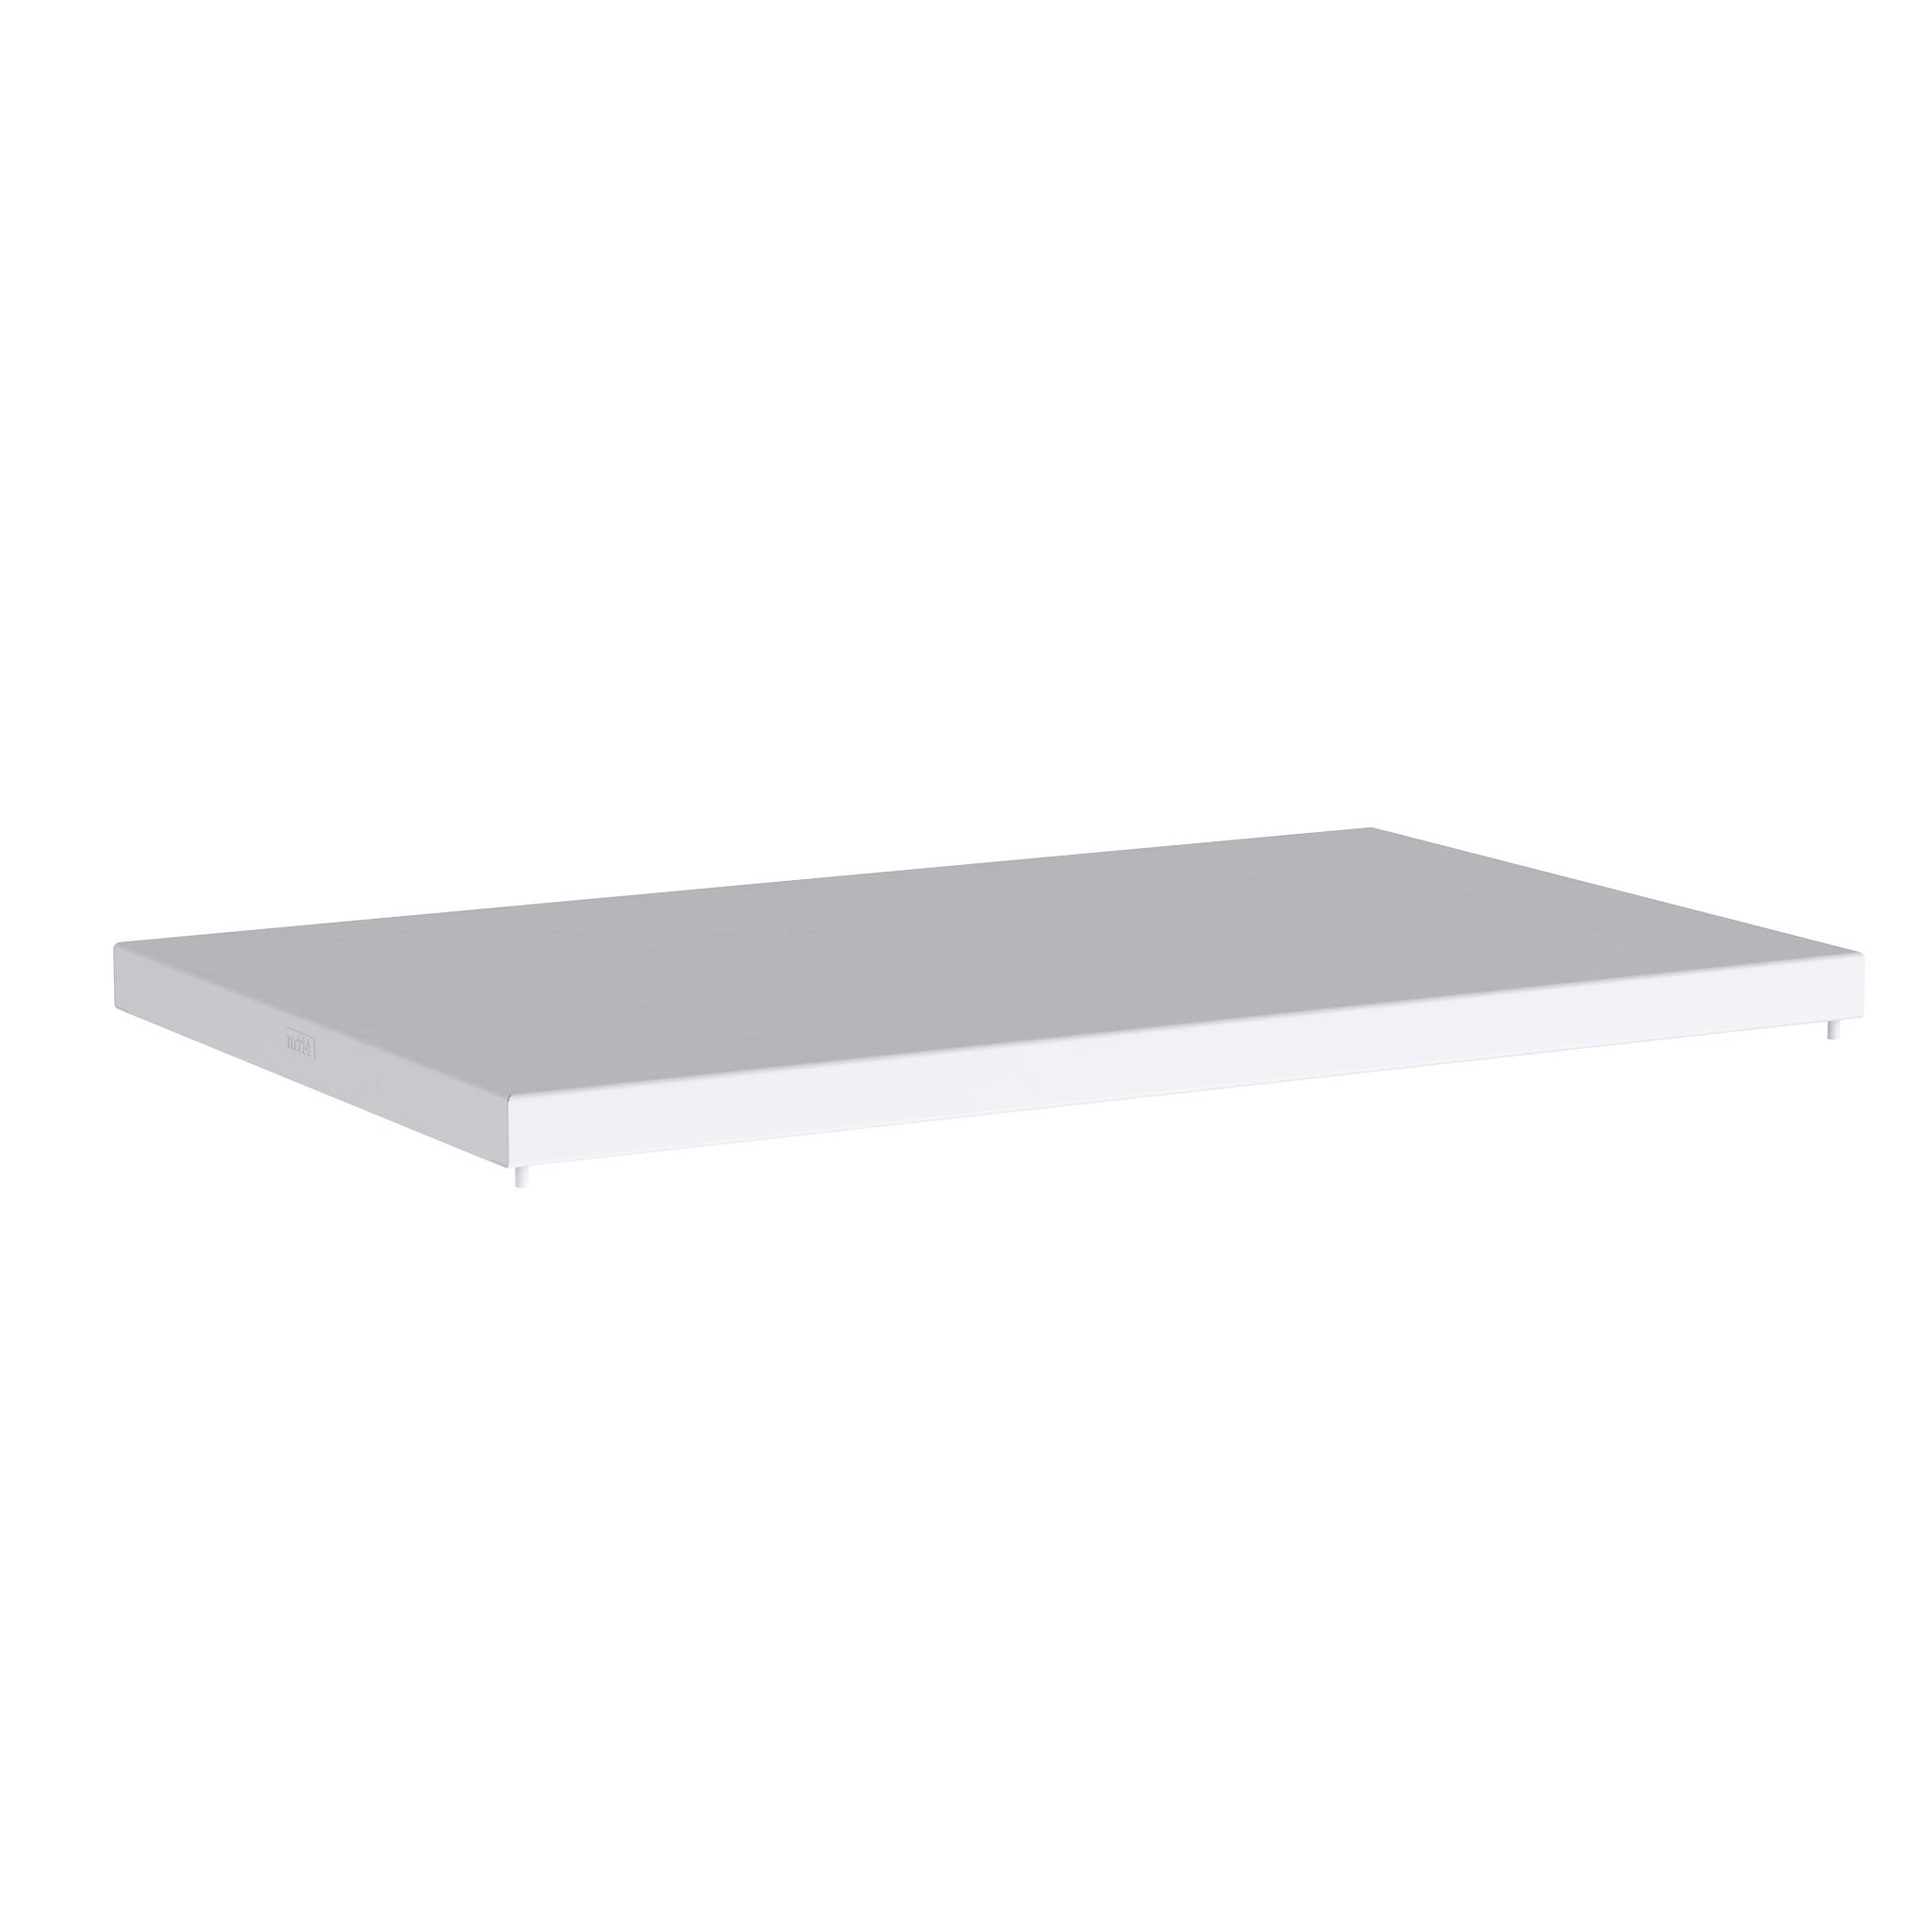 TRIA Storage System - Cabinet Top Cover by Mobles 114